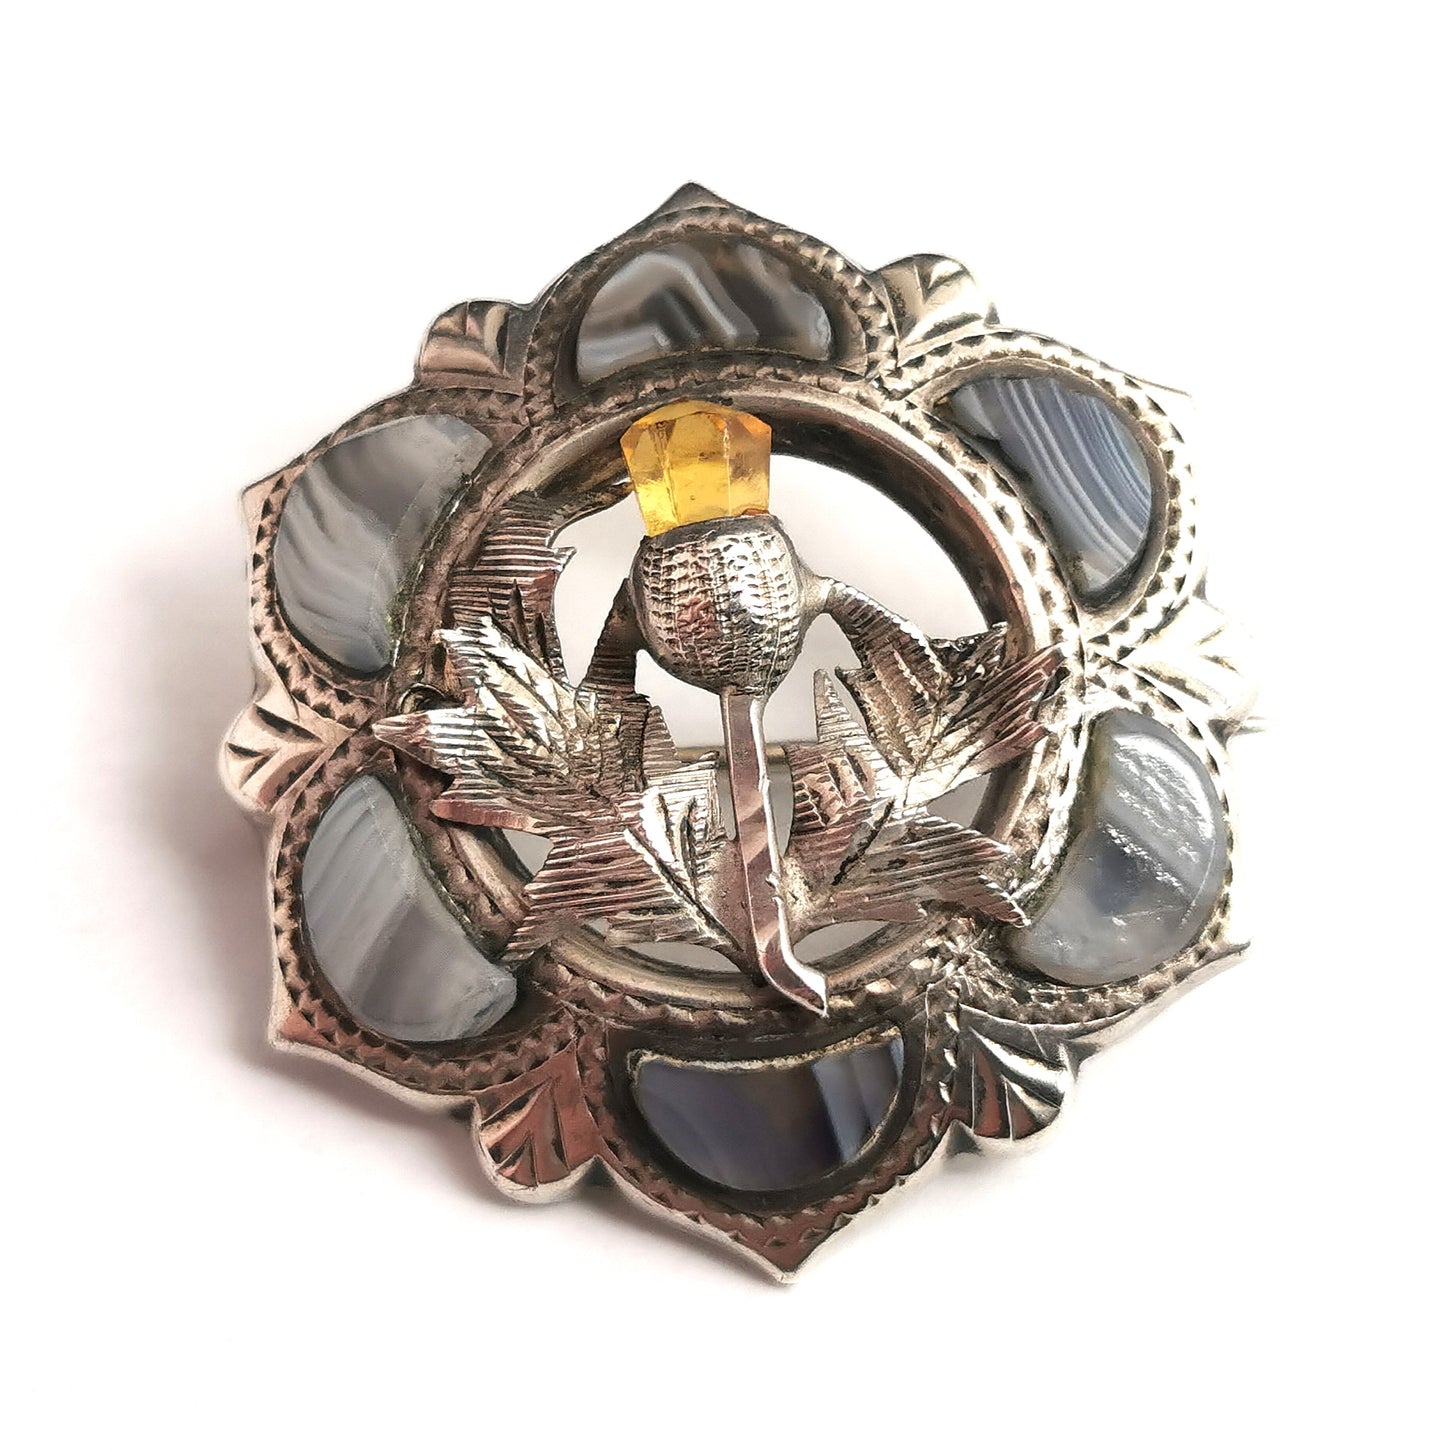 Antique Scottish agate and Silver Thistle brooch, Victorian